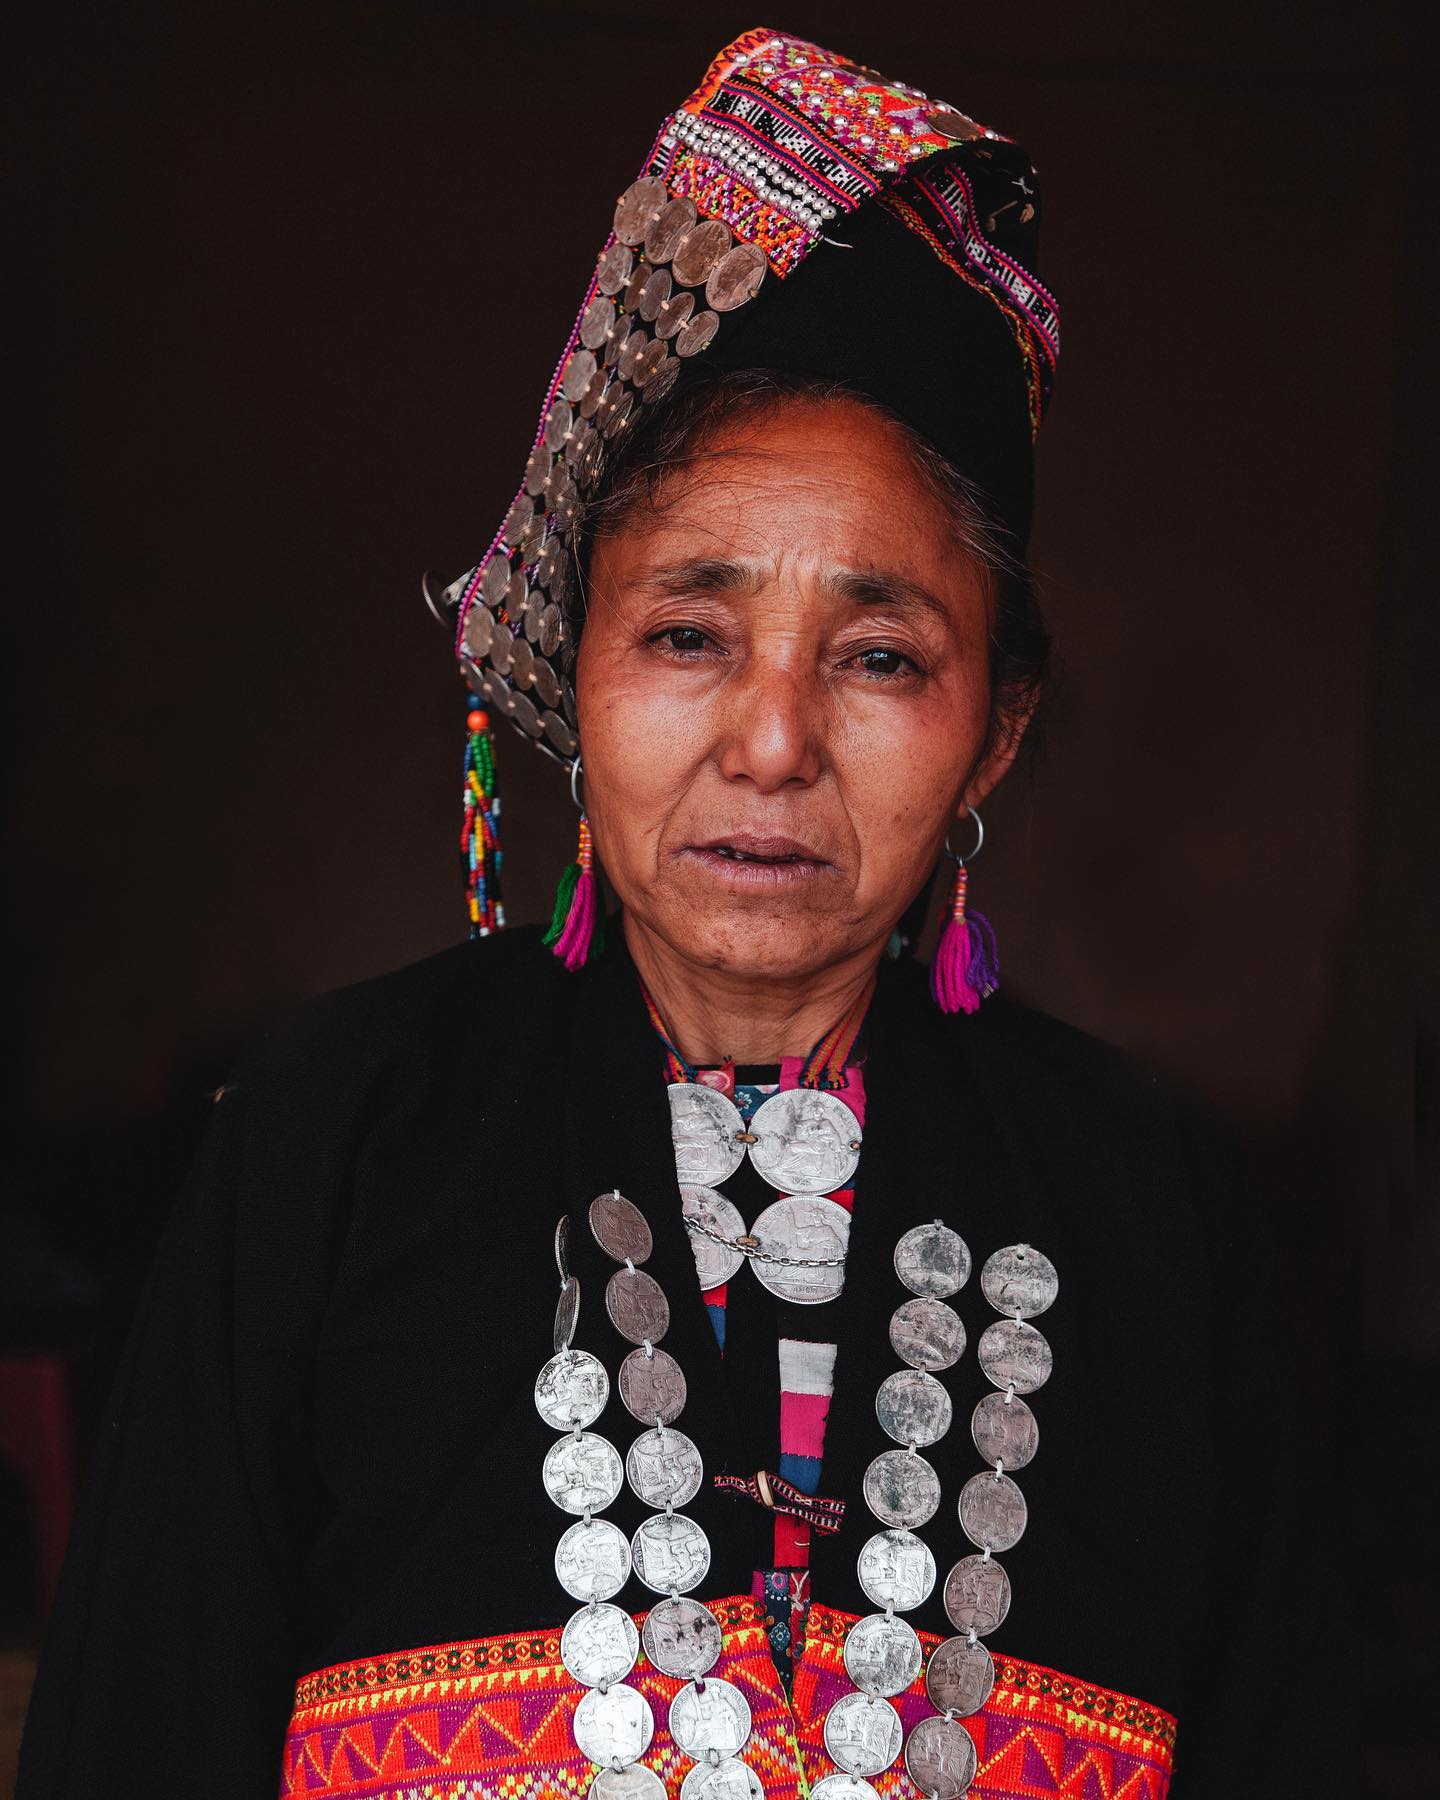 A woman from the Akha Loma minority in Muang La province, Laos.  The villagers here were very unused to seeing foreigners and I was surrounded by curious people the whole time there.